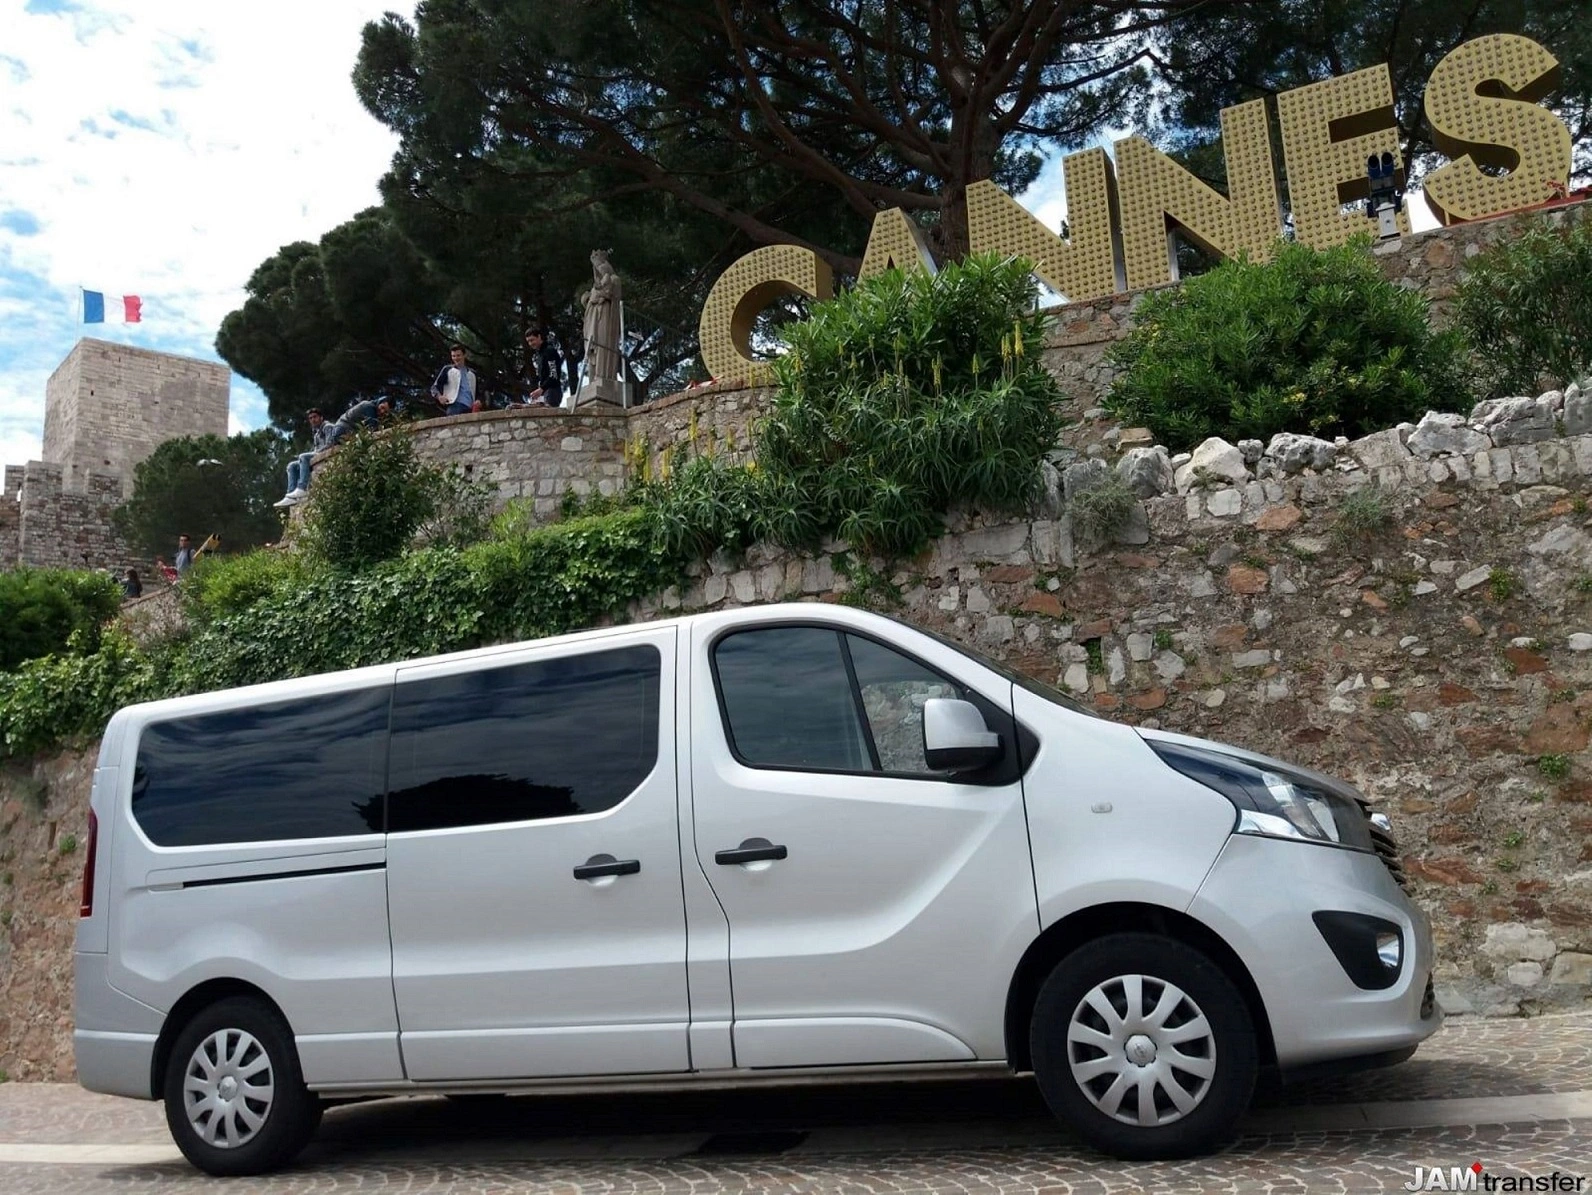 Cannes taxi